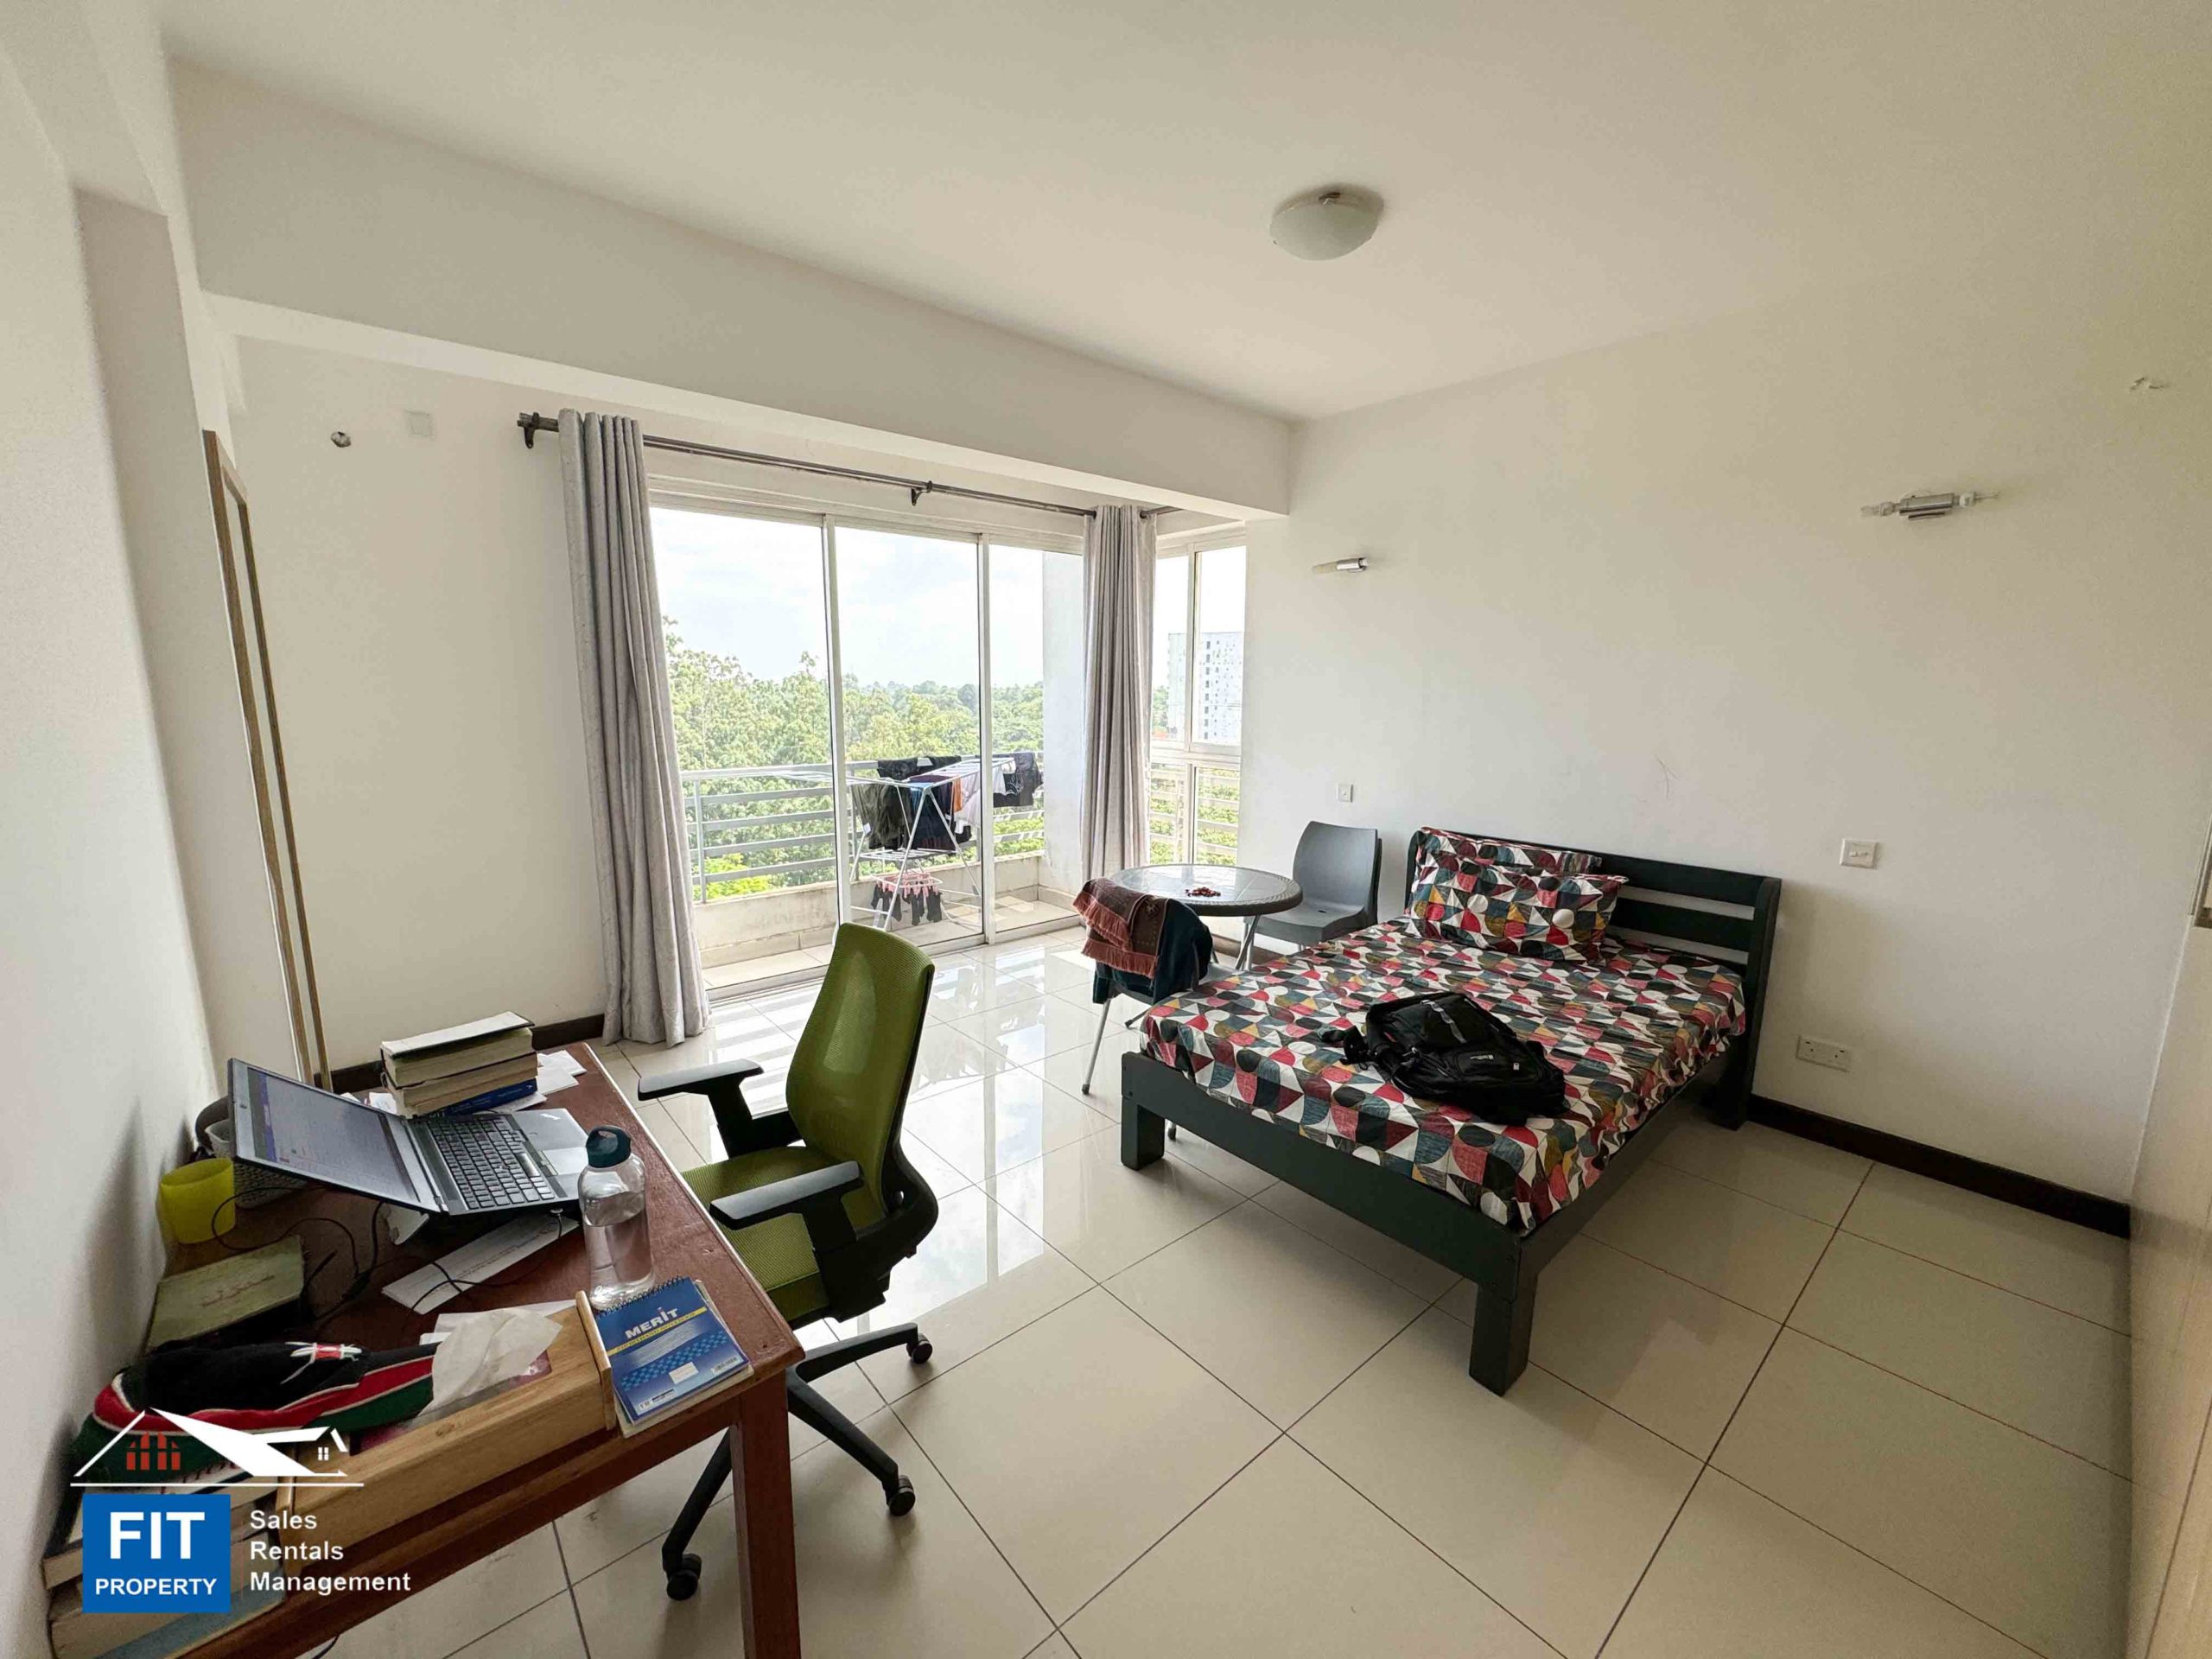 Captivating 3 Bed Penthouse for Sale, Overlooking Karura Forest, 6th Parklands, Nairobi. Priced at KES 22M fit property